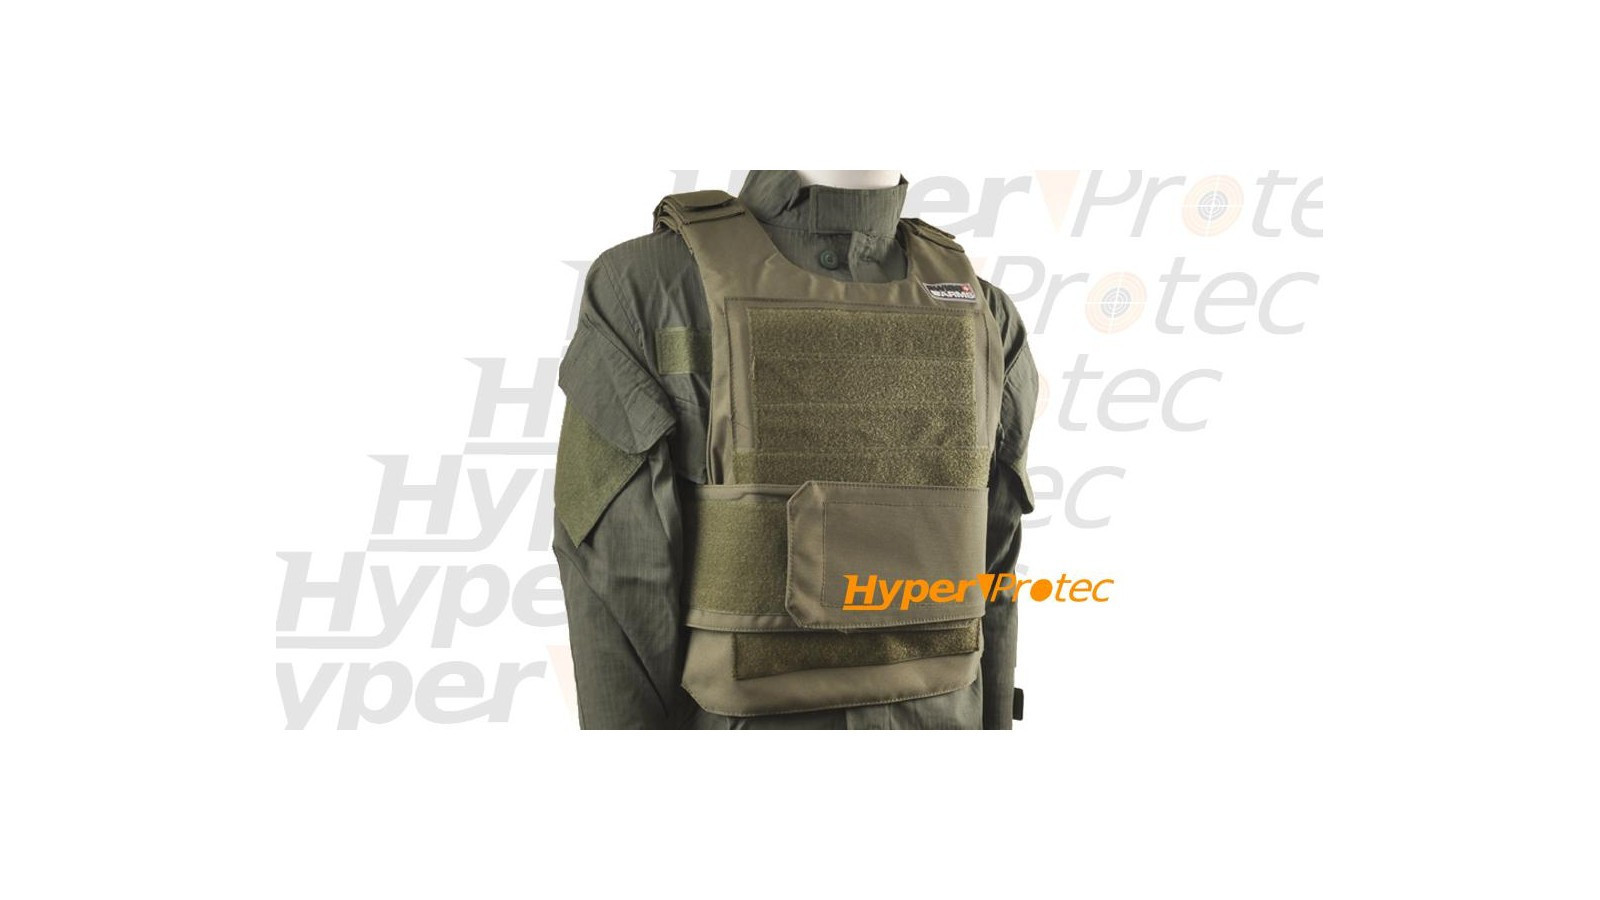 Gilet Pare-balle airsoft - Heritage Airsoft